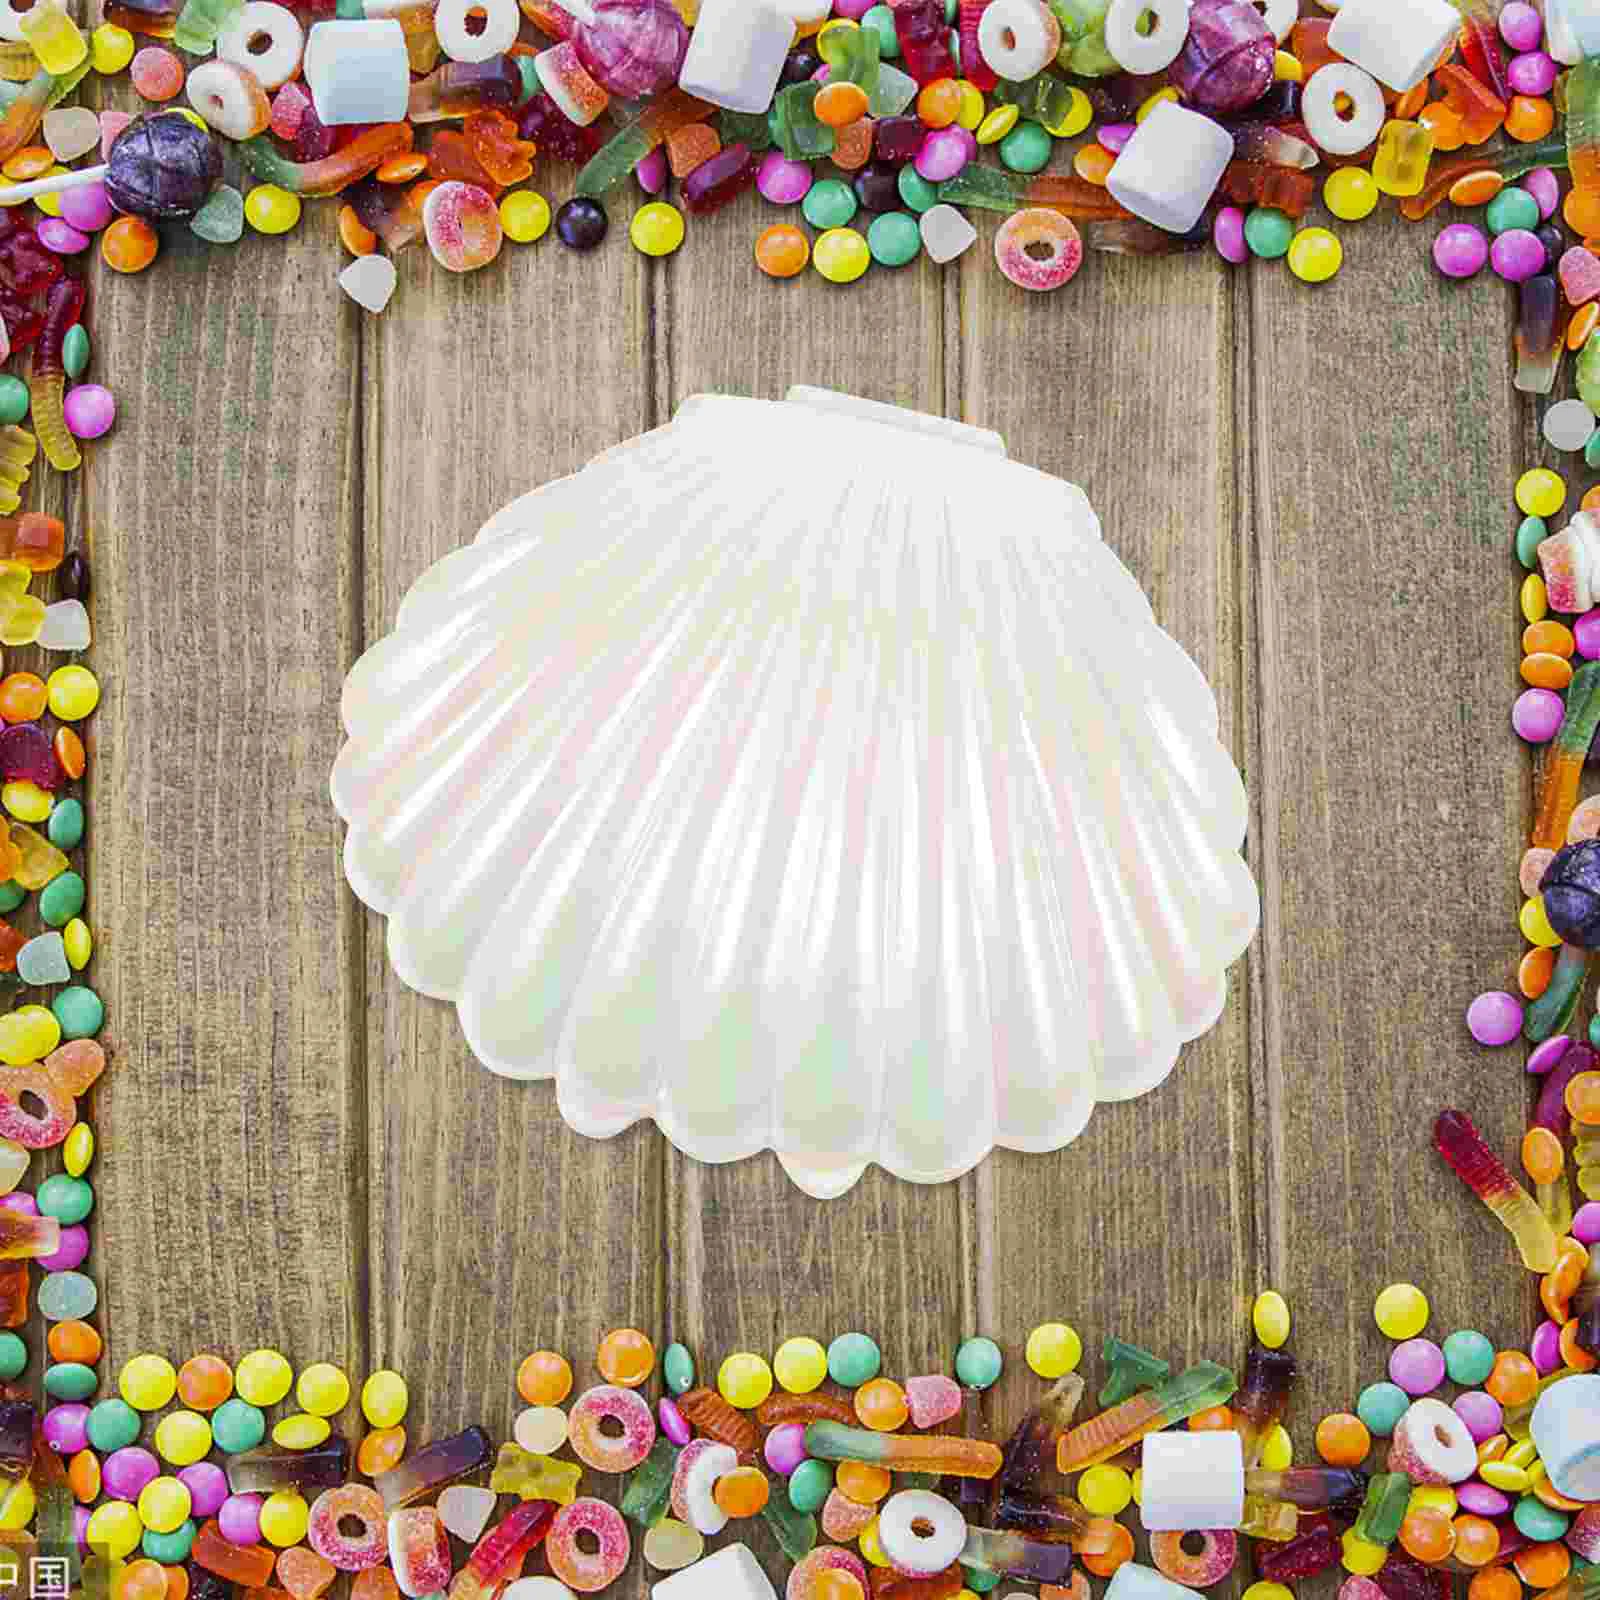 

10 Pcs Plastic Candy Containers Box Seashell Jewelry Dish Small Jar Fine Party Favor White Pp Holder